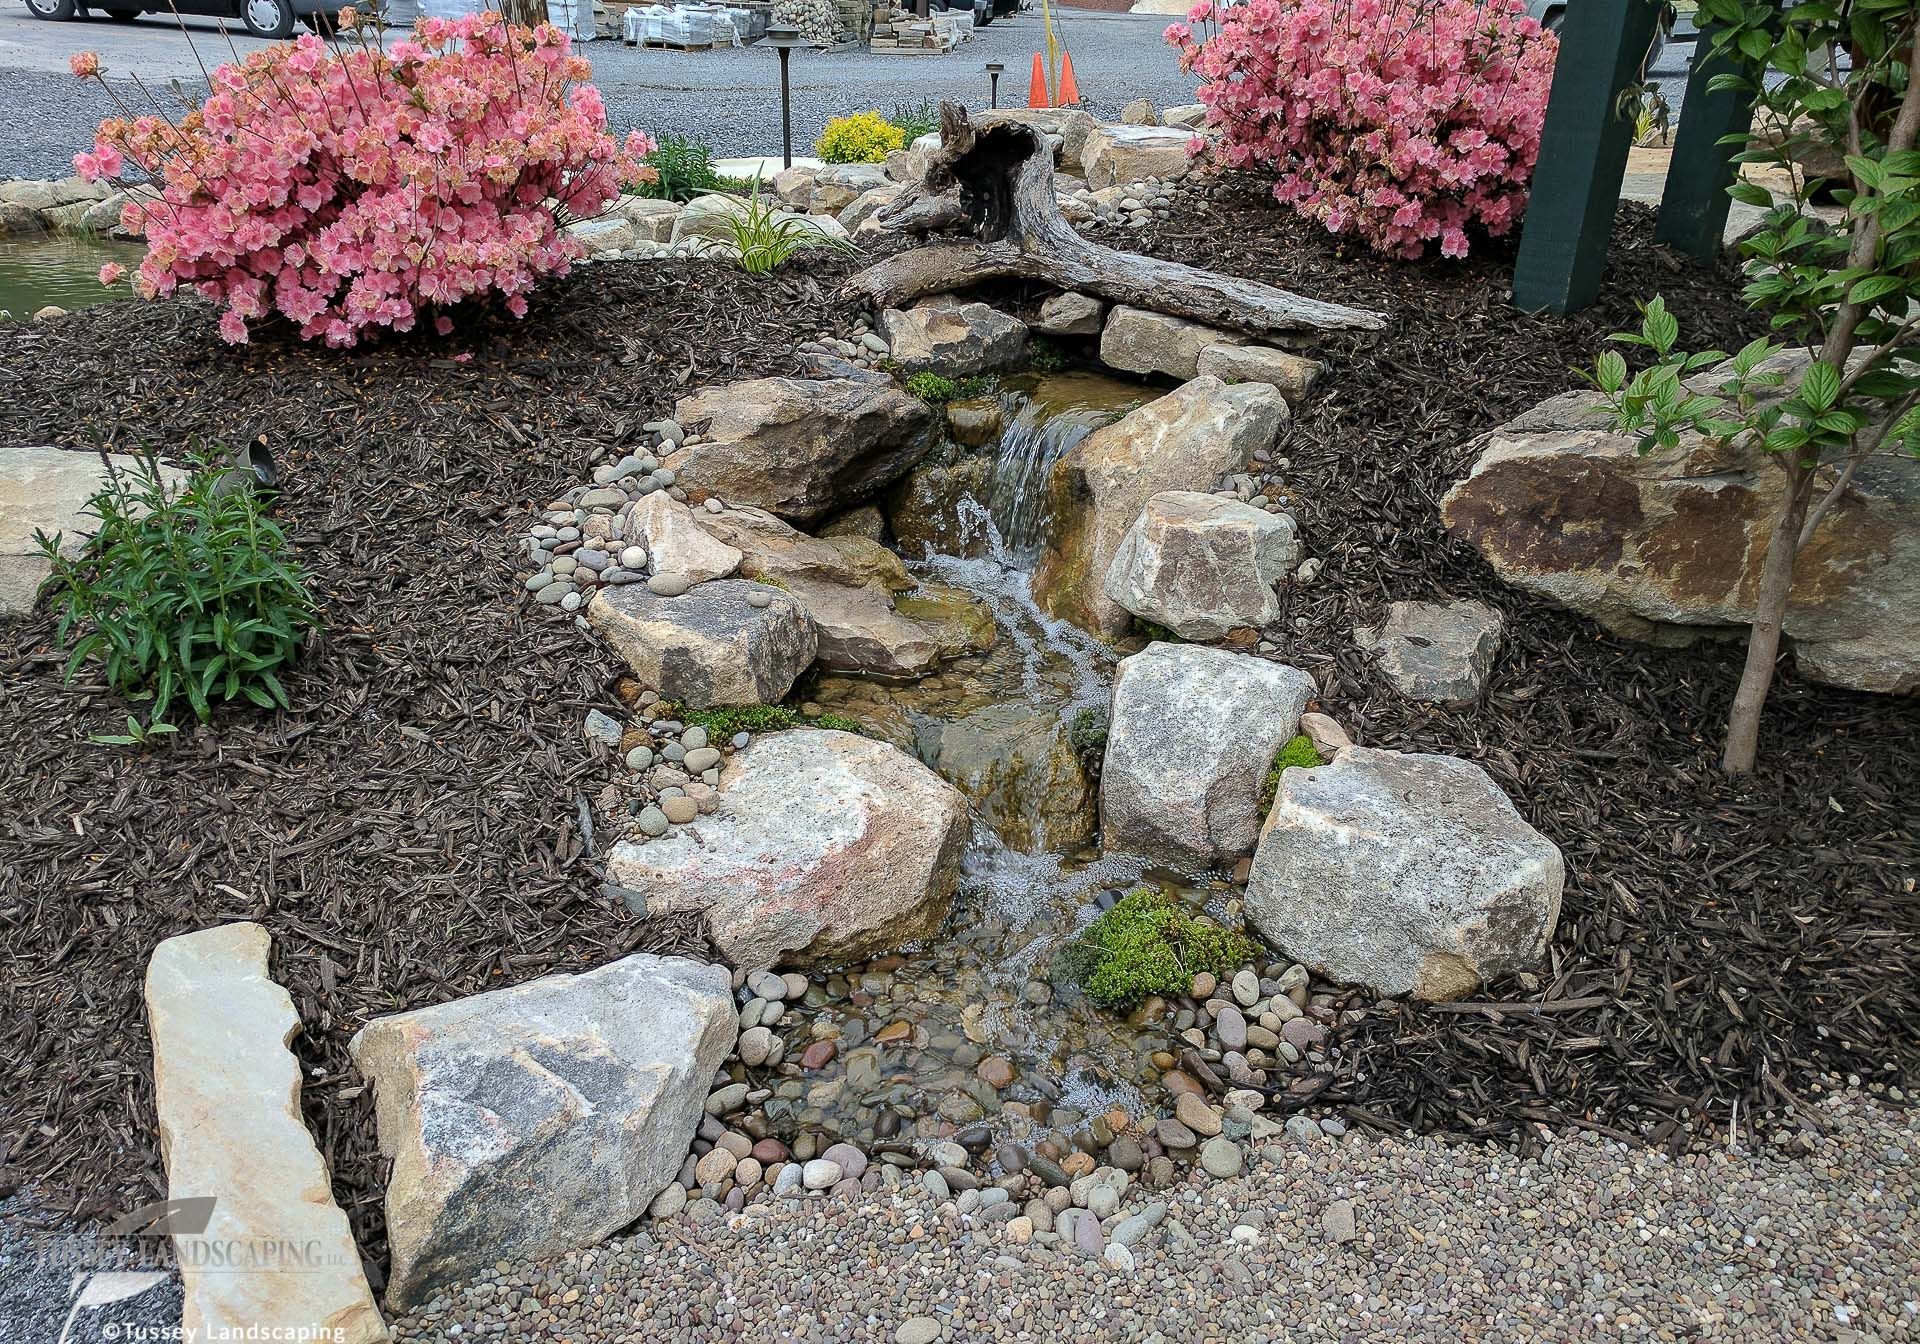 A small stream with rocks and flowers in front of a house.